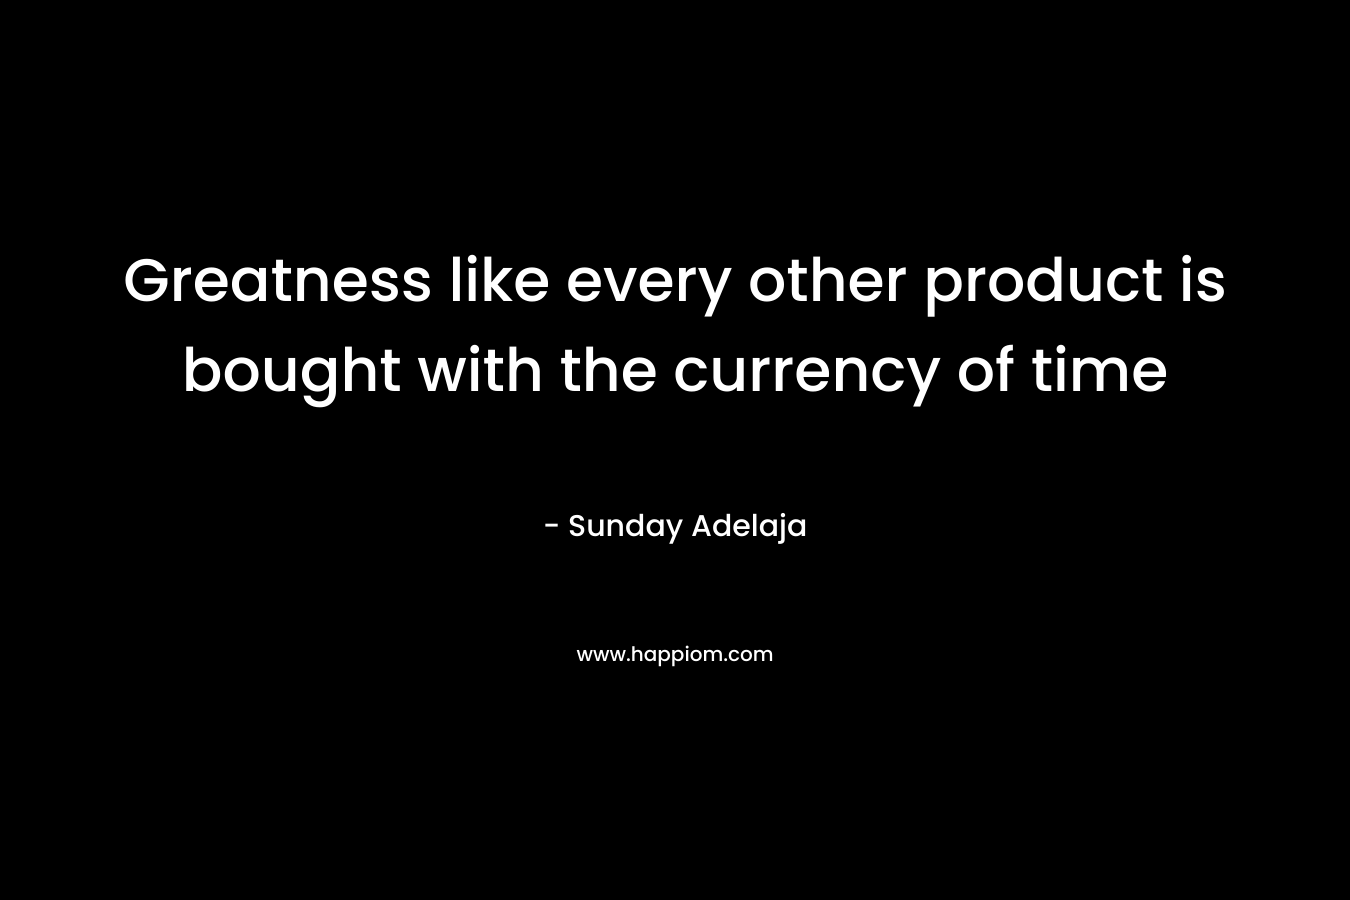 Greatness like every other product is bought with the currency of time